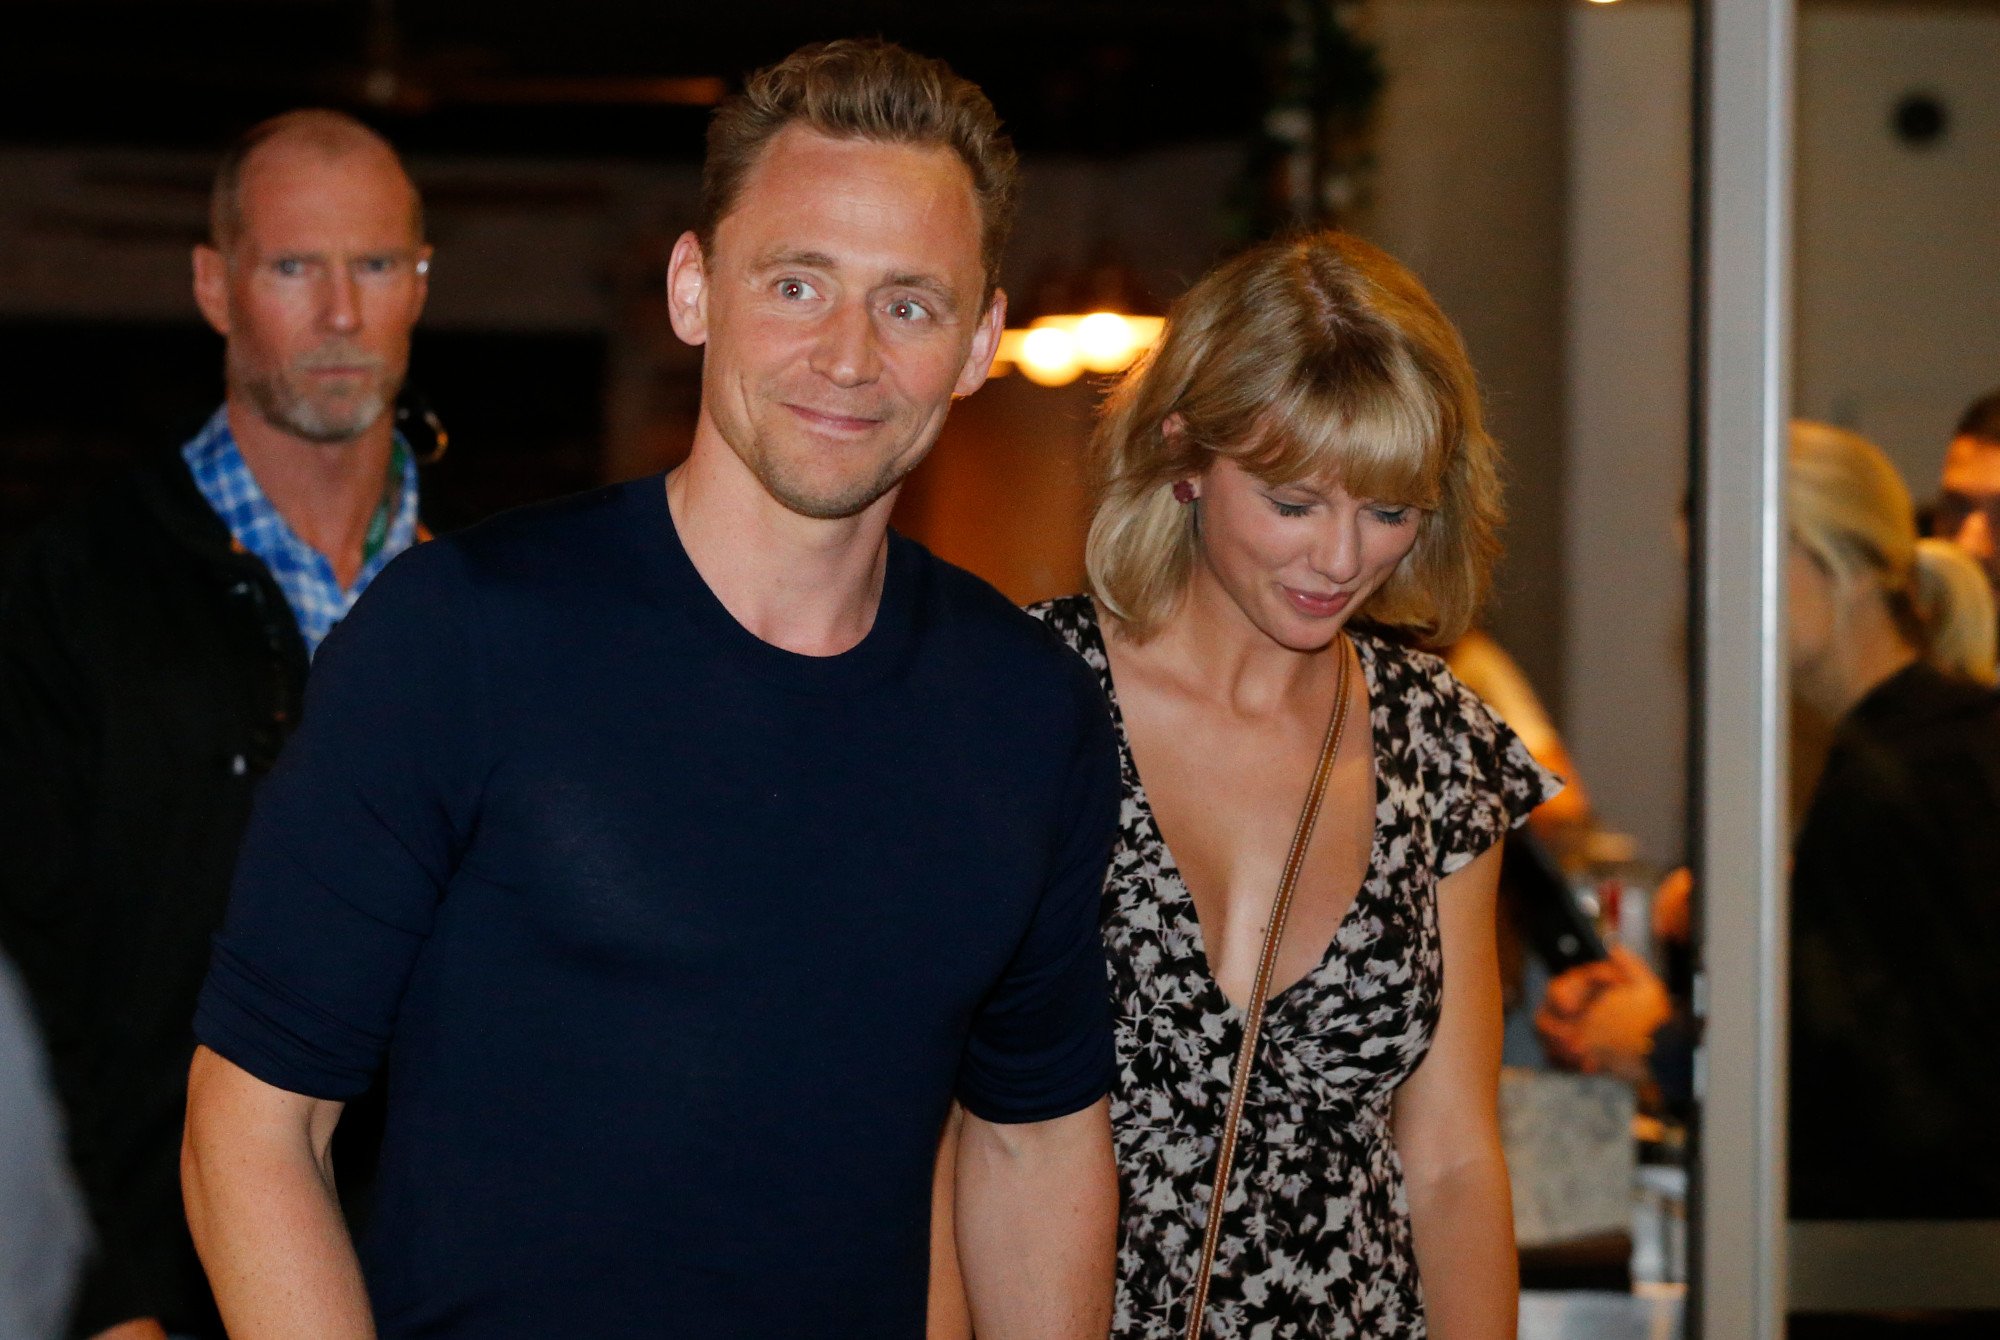 Tom Hiddleston wearing a black shirt and looking surprised. Taylor Swift walks next to him with her head down.